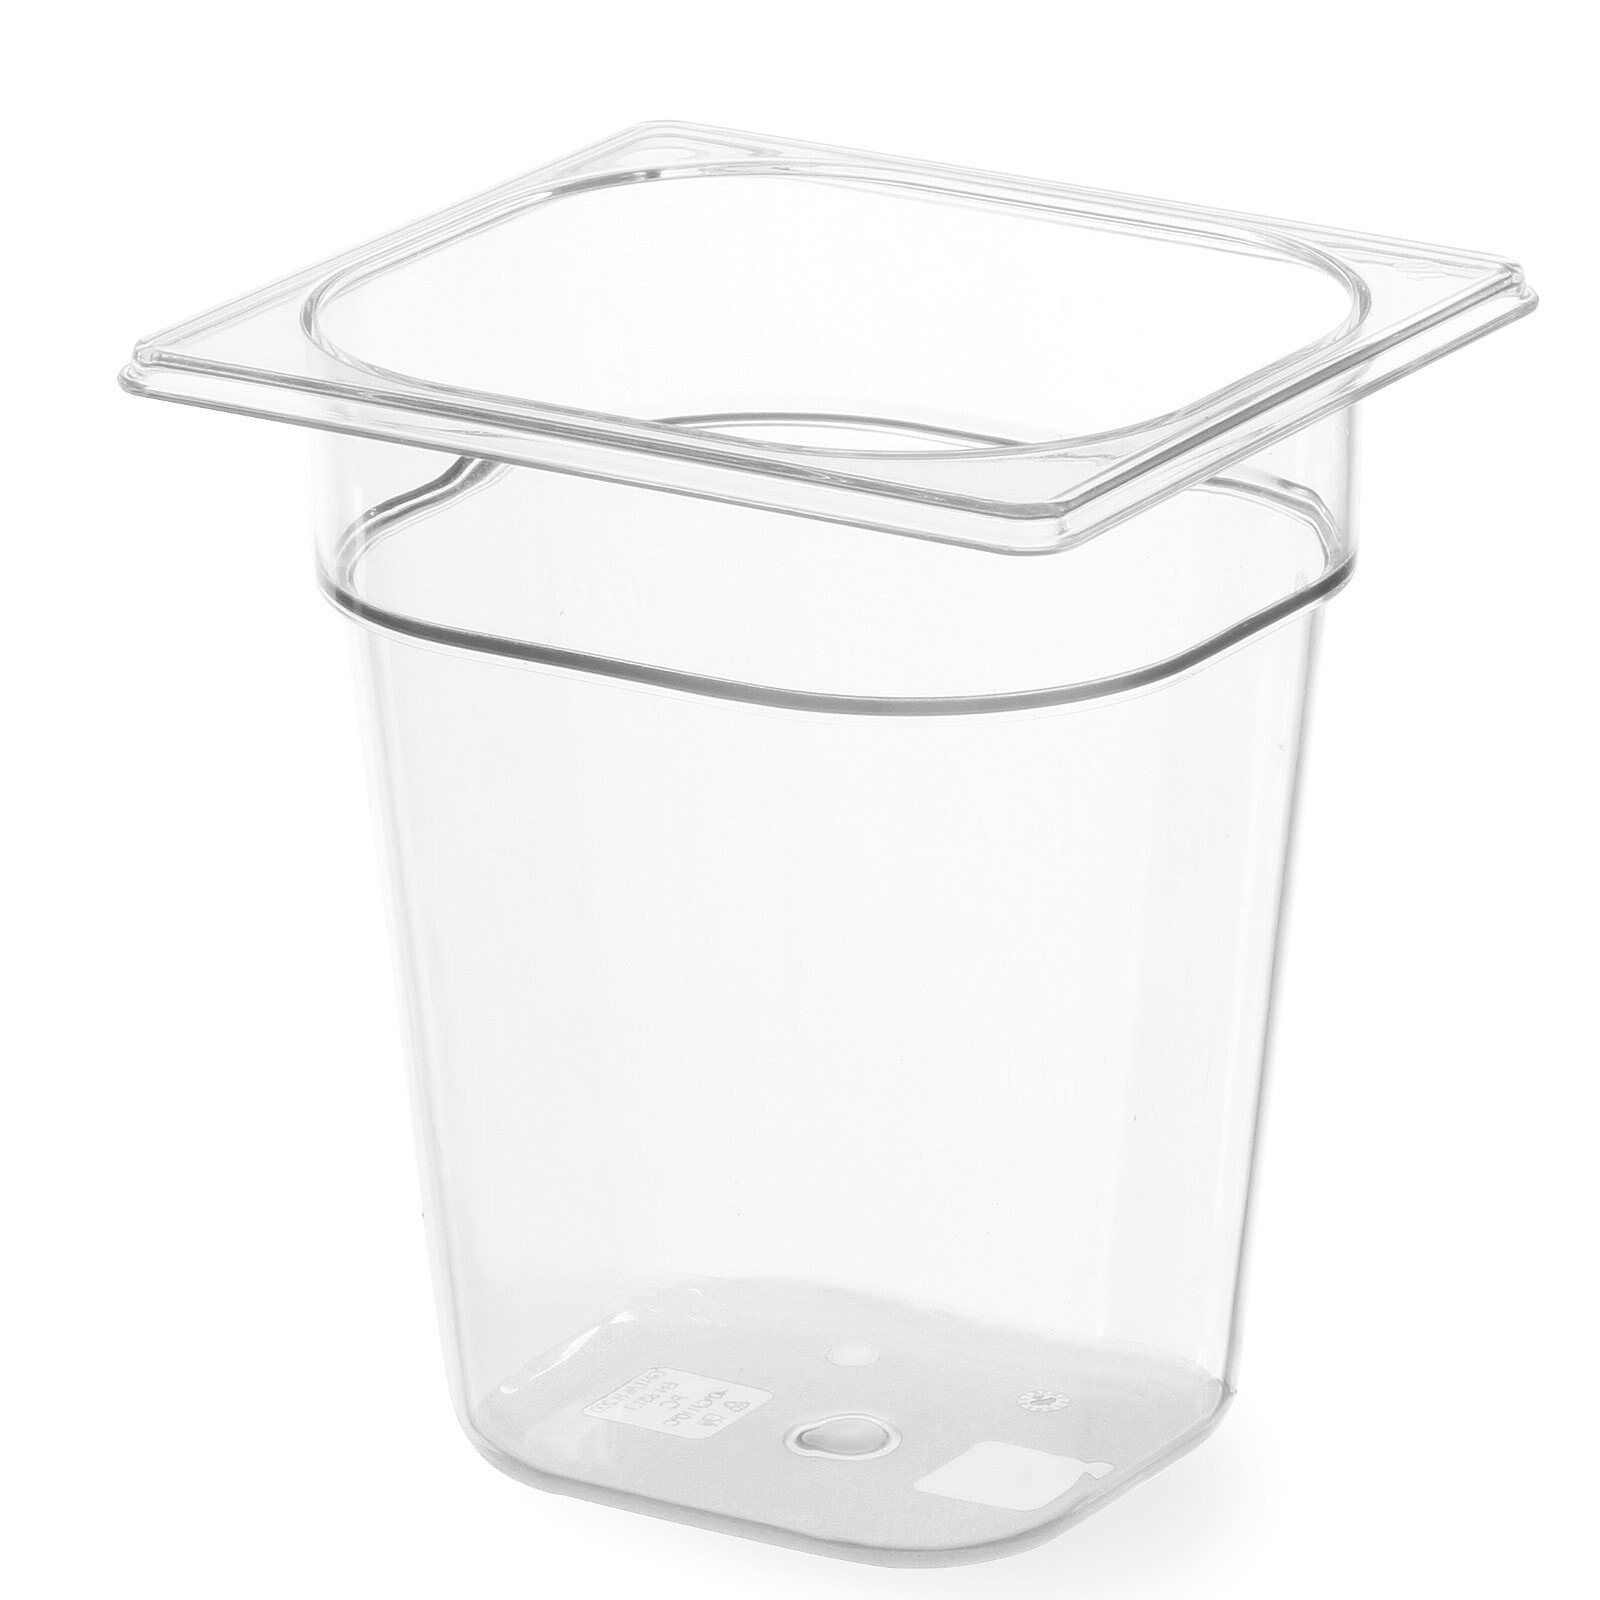 Transparent GN container made of polycarbonate GN 1/6, height 150 mm - Hendi 861714